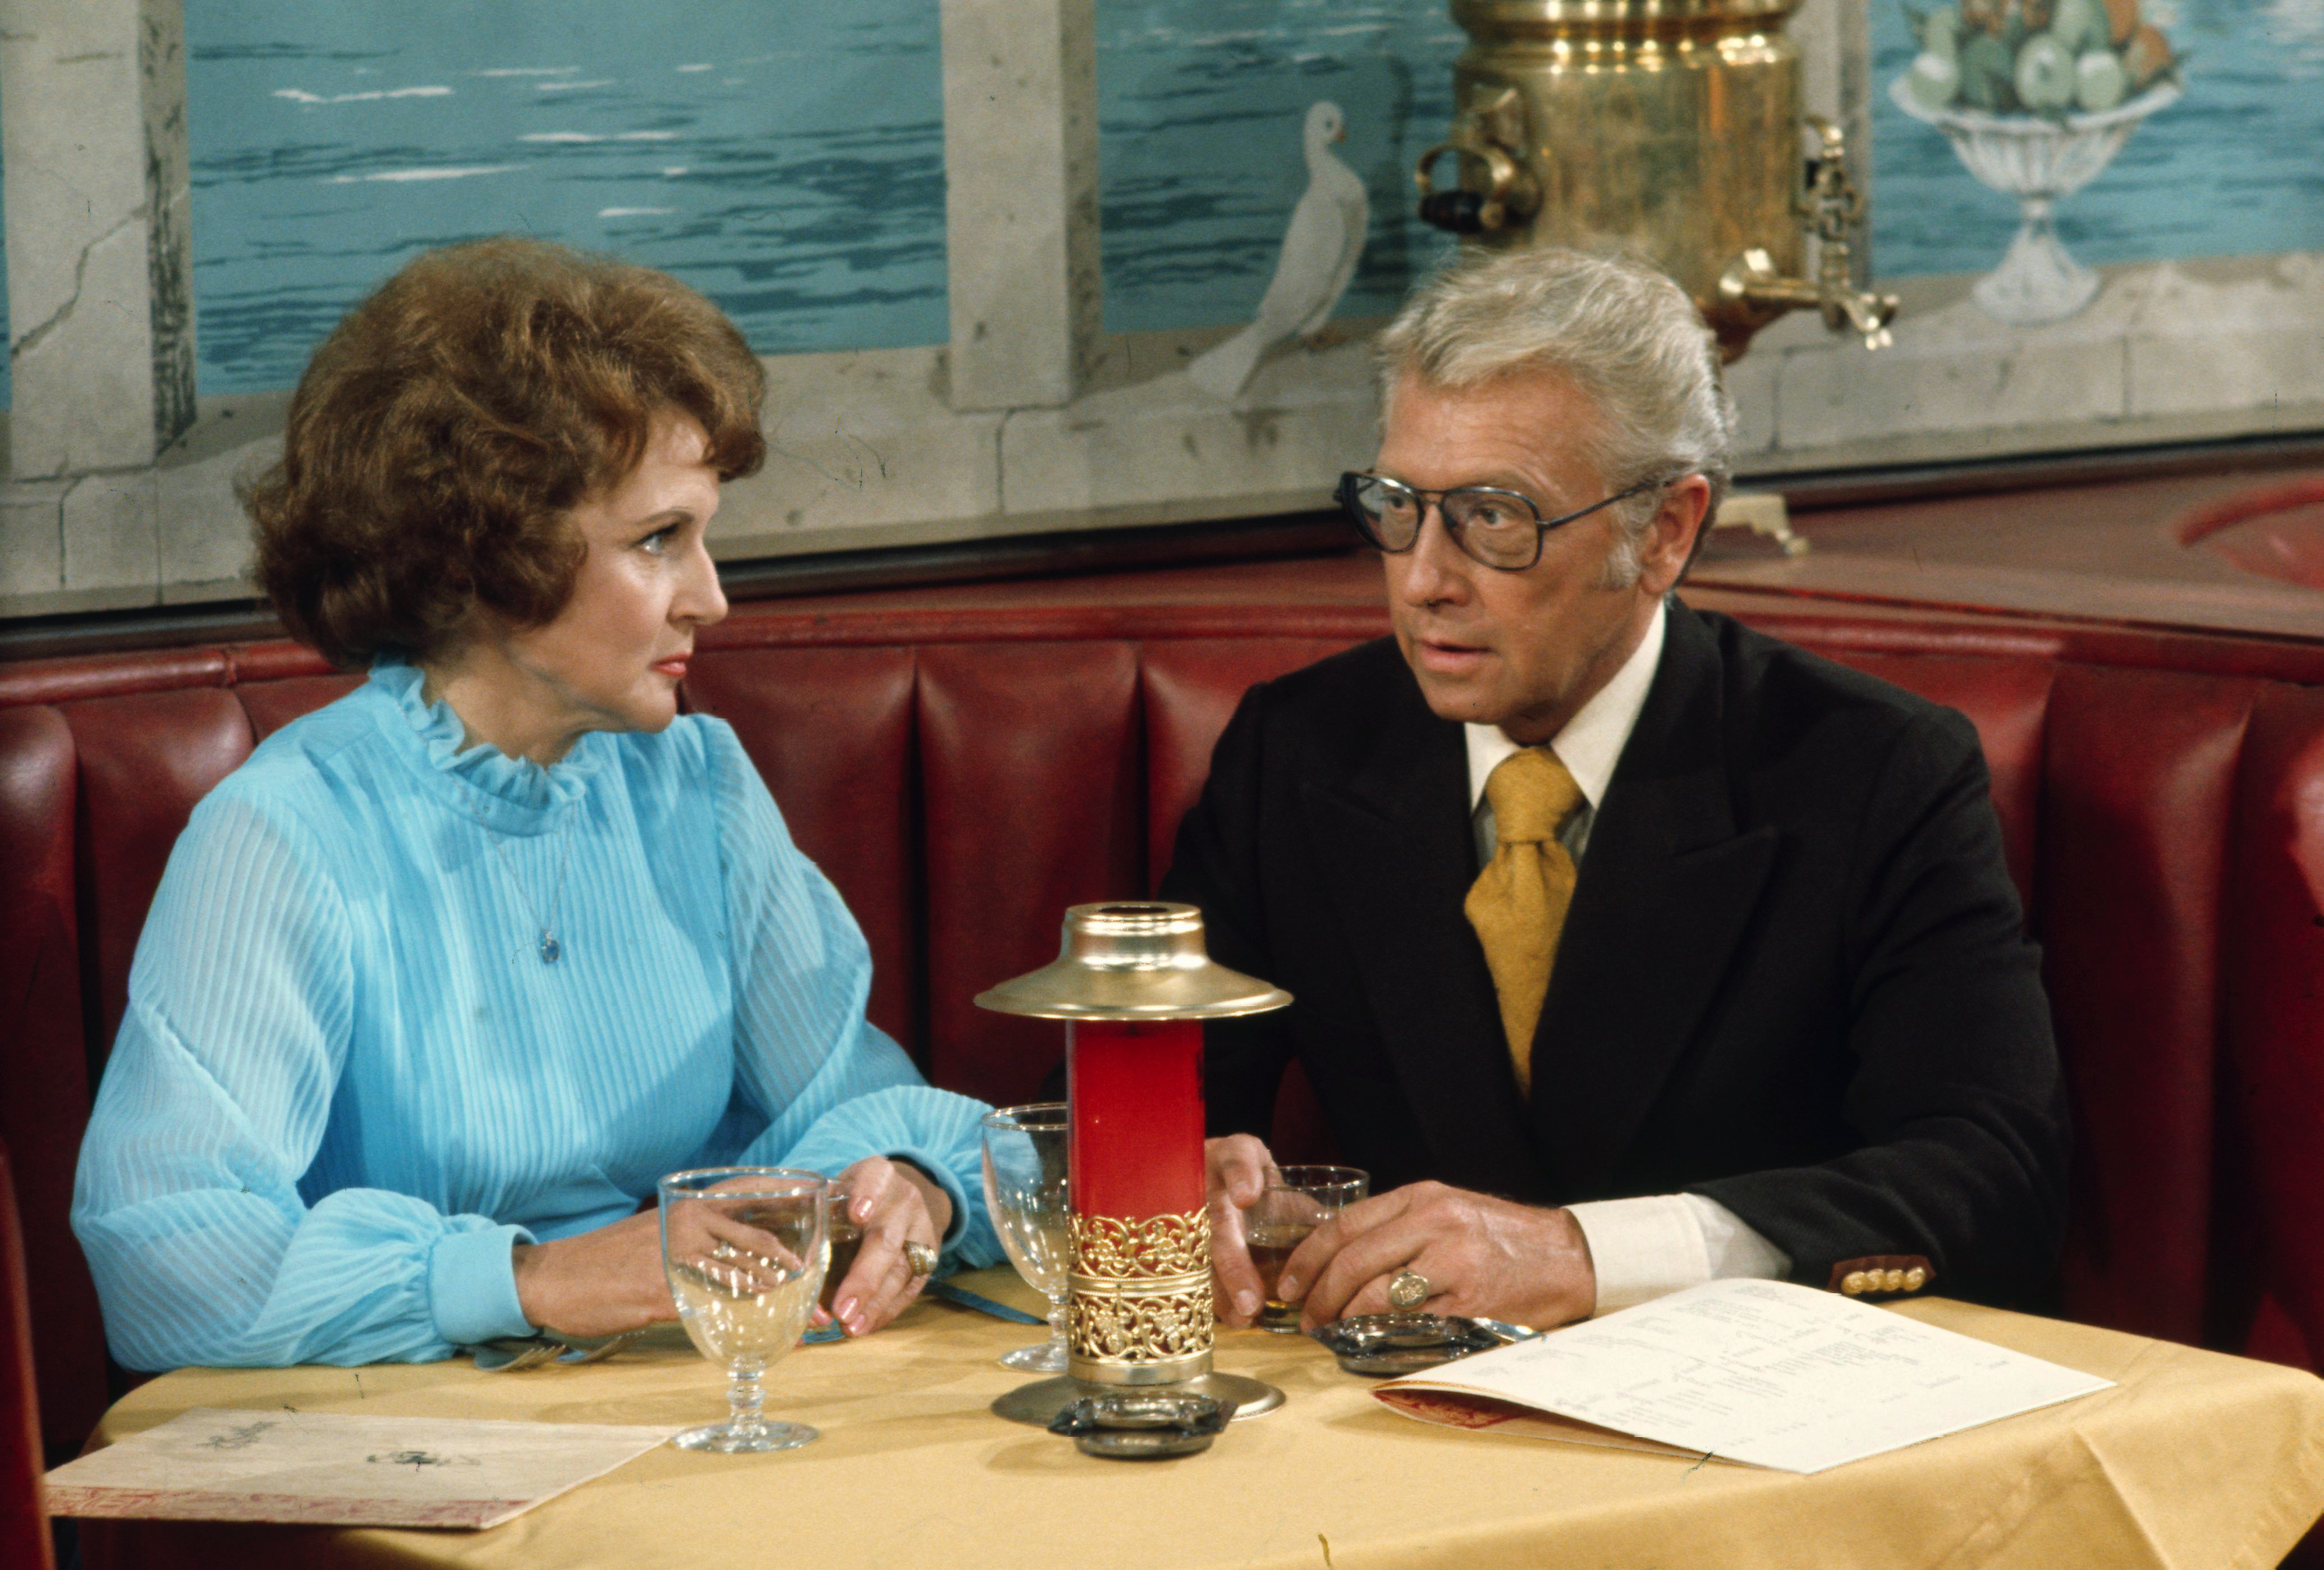 Betty White and Allen Ludden in the United States in 1972. | Source: Getty Images 